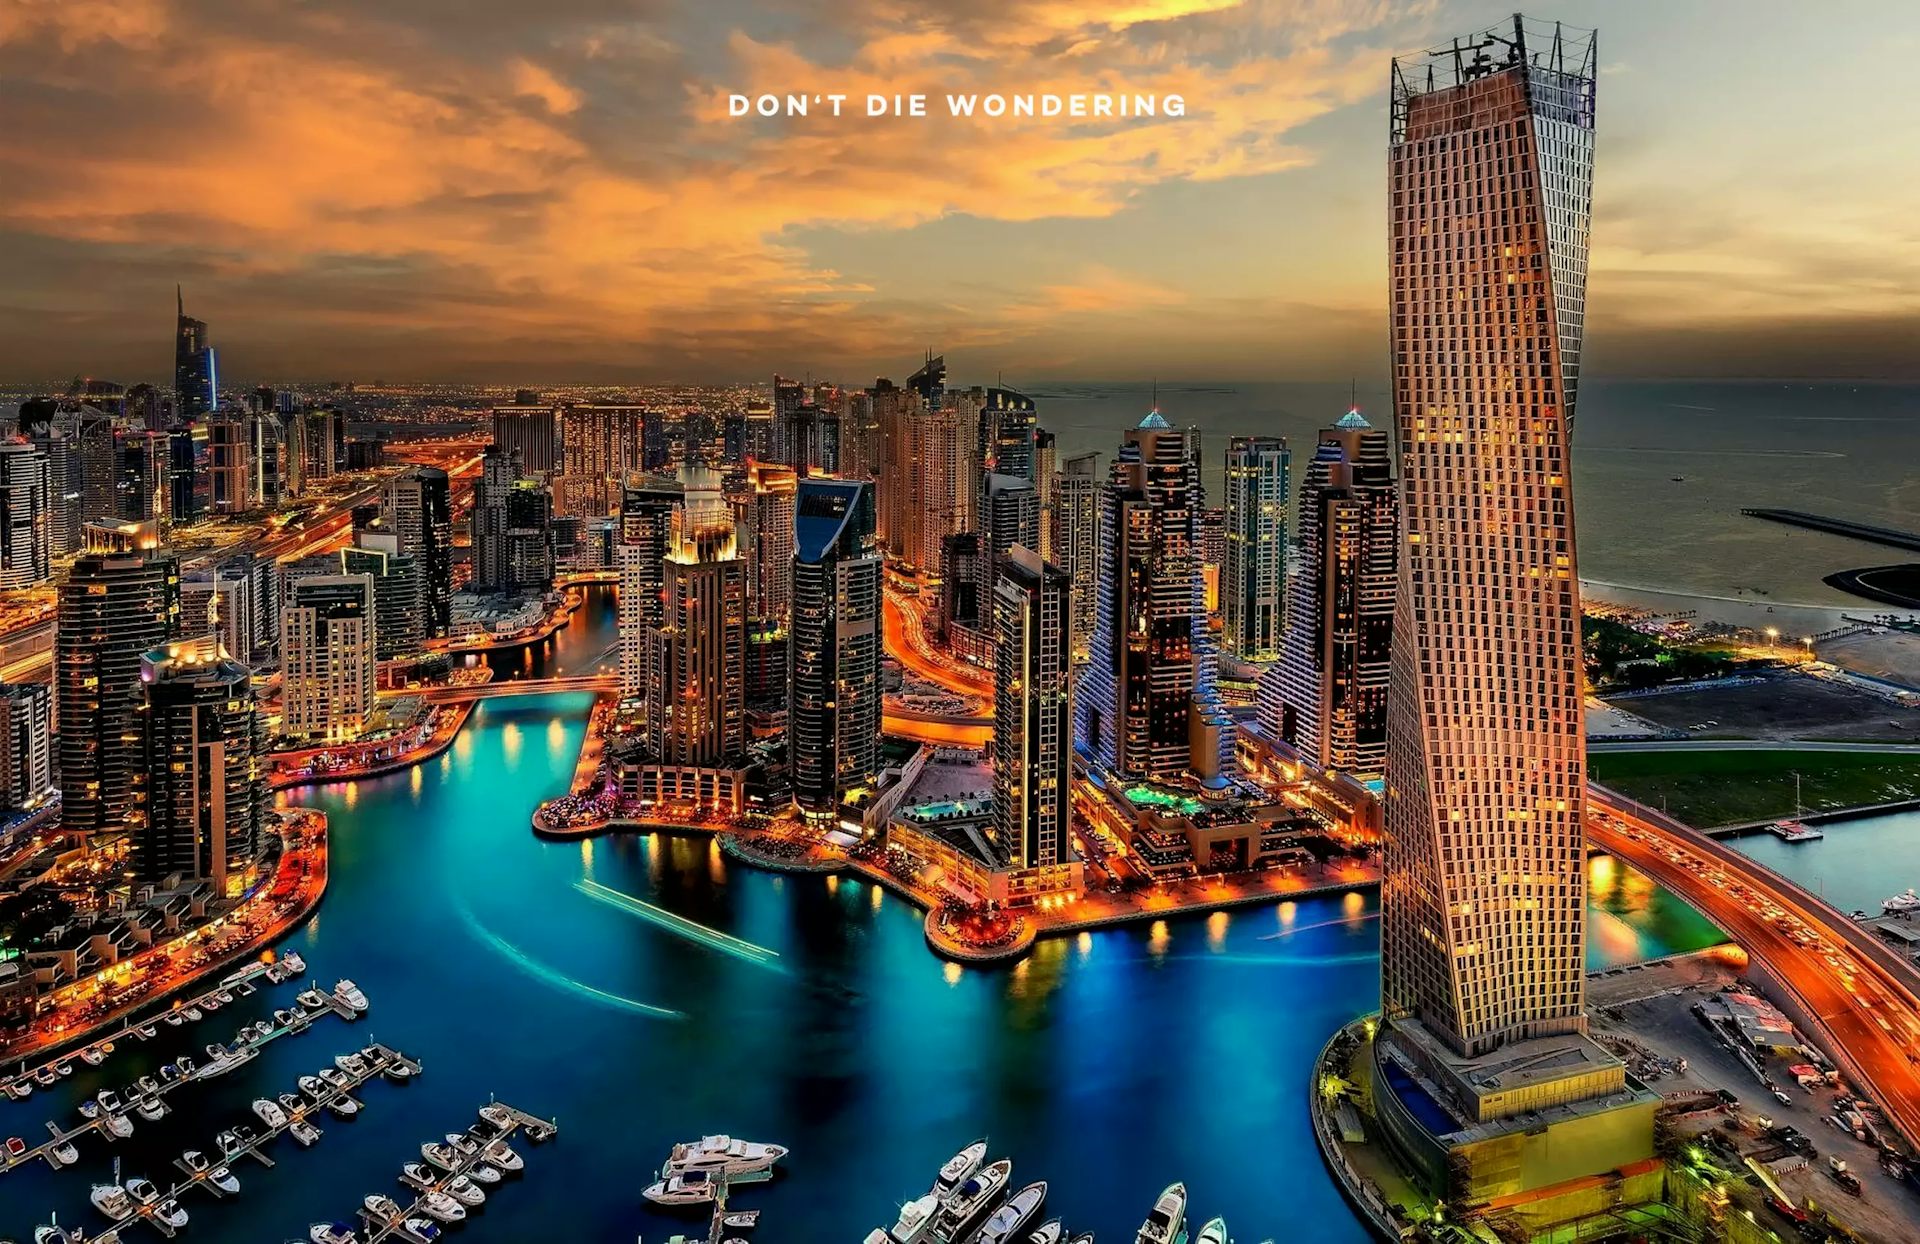 Which type of real estate is more profitable for investors in Dubai Marina?